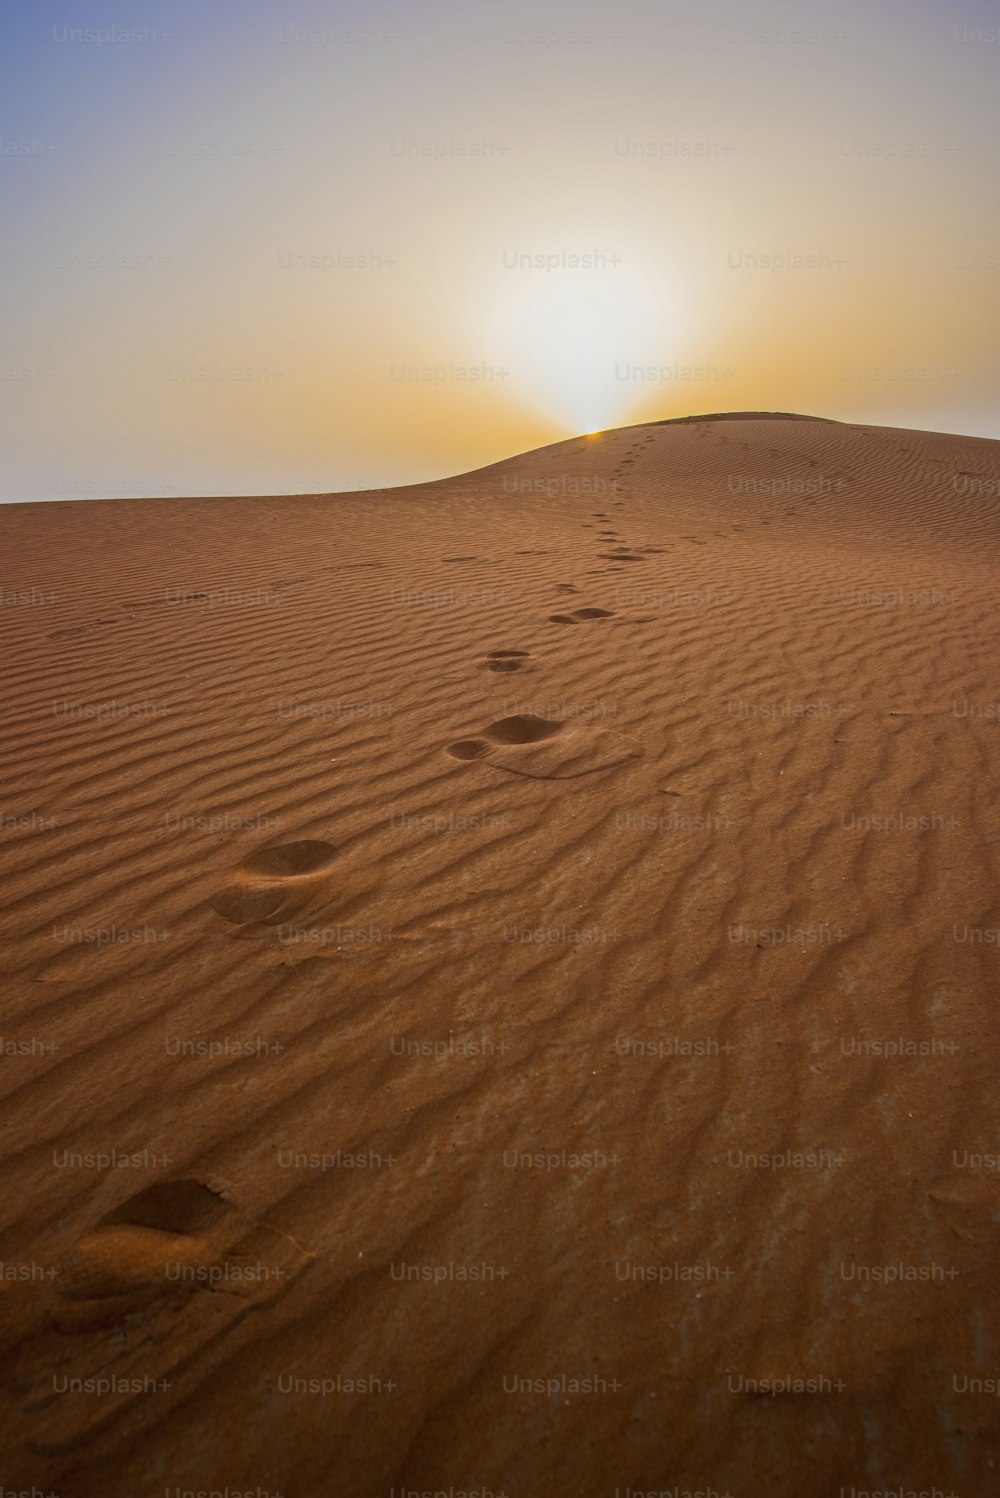 Beautiful desert sunrise with sun visible and sand dooms with sand pattern &walk triles